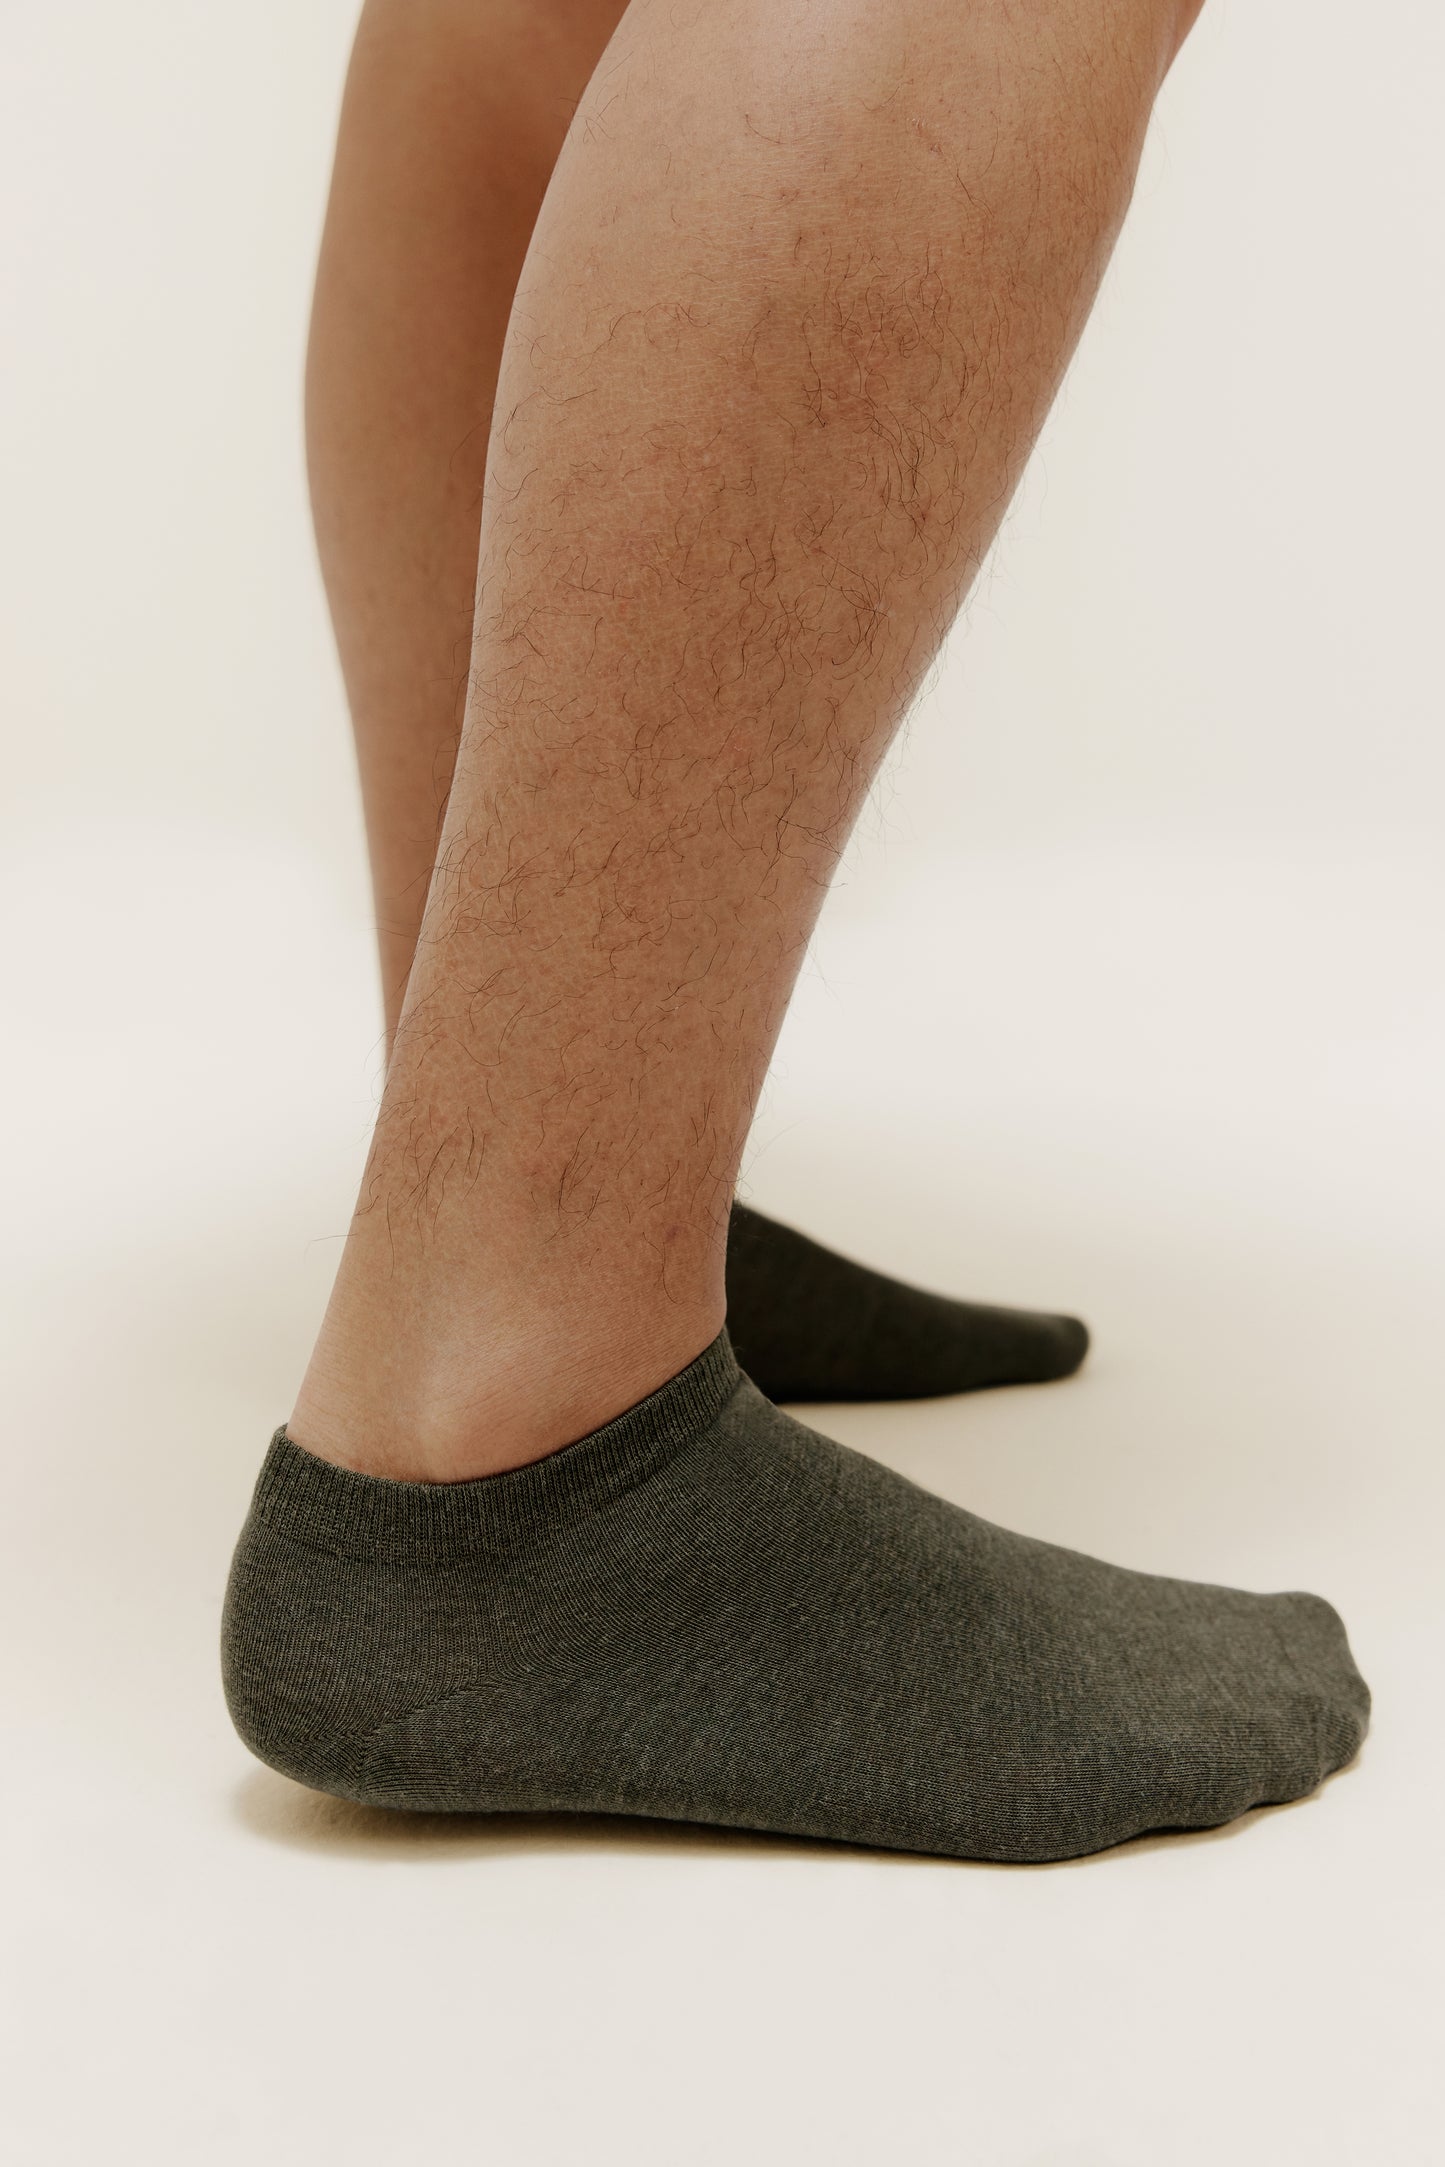 side view of a person wearing dark green ankle socks